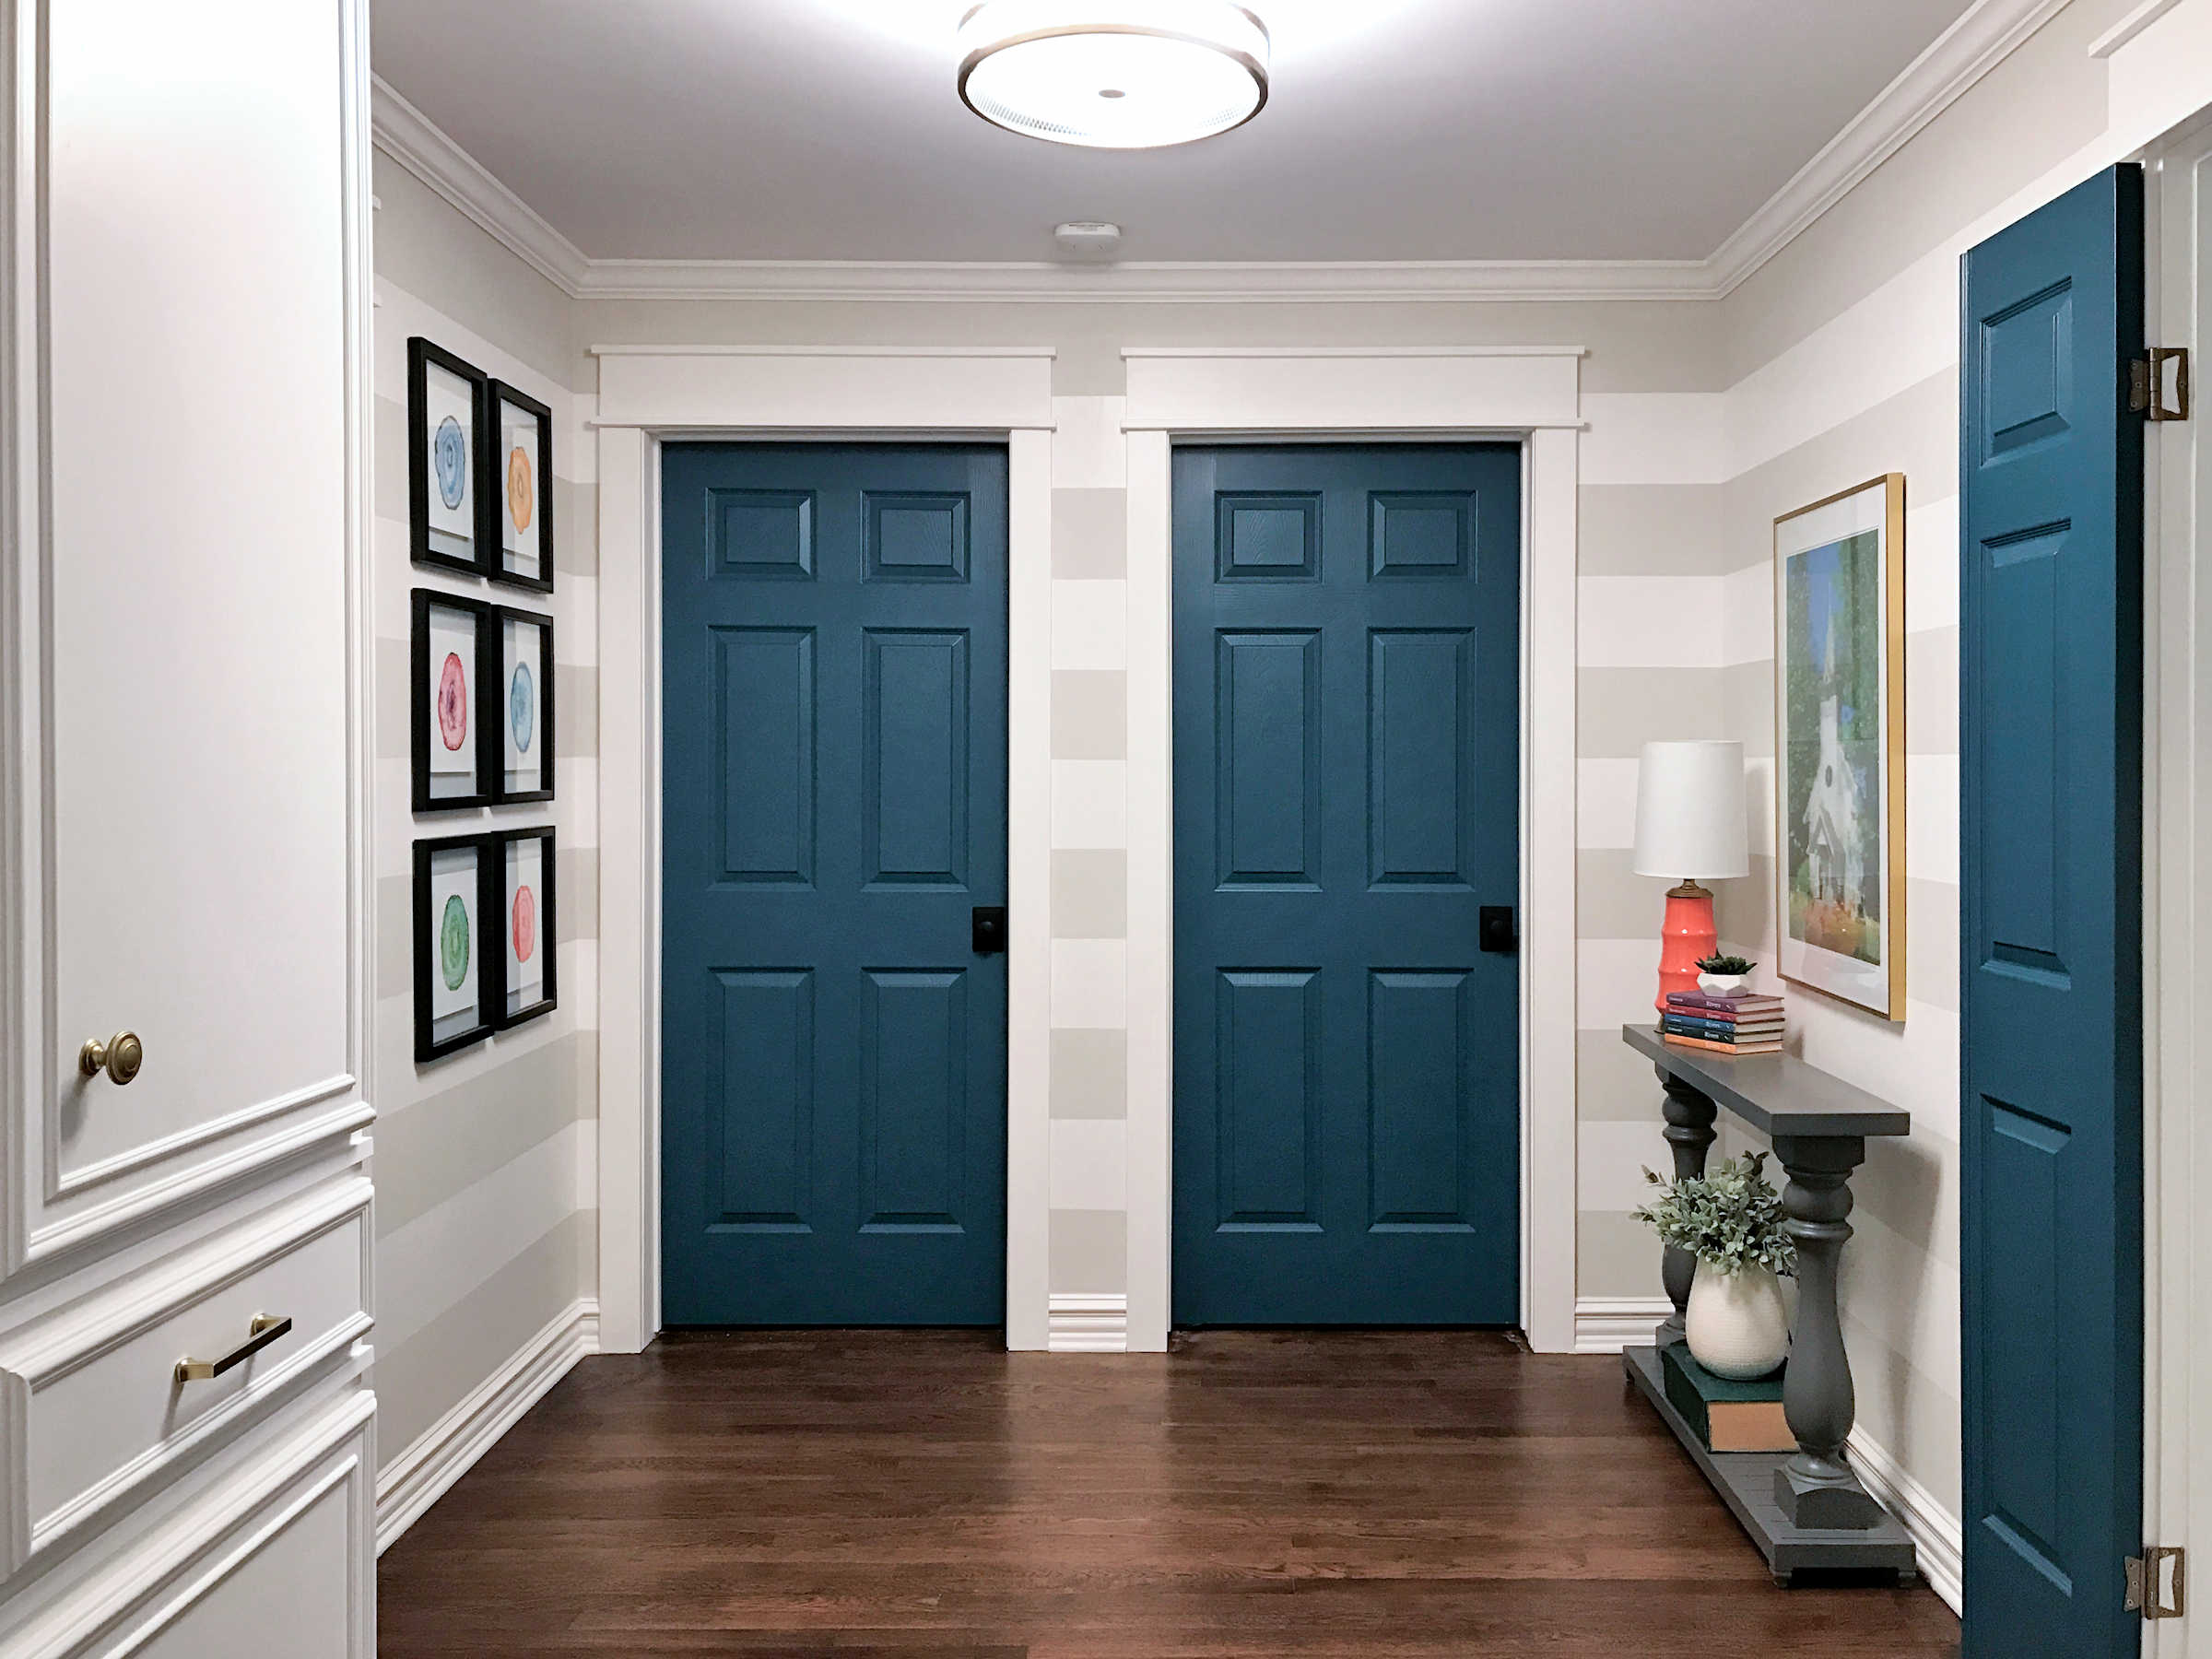 hallway remodel with striped walls, teal doors, and custom cabinet